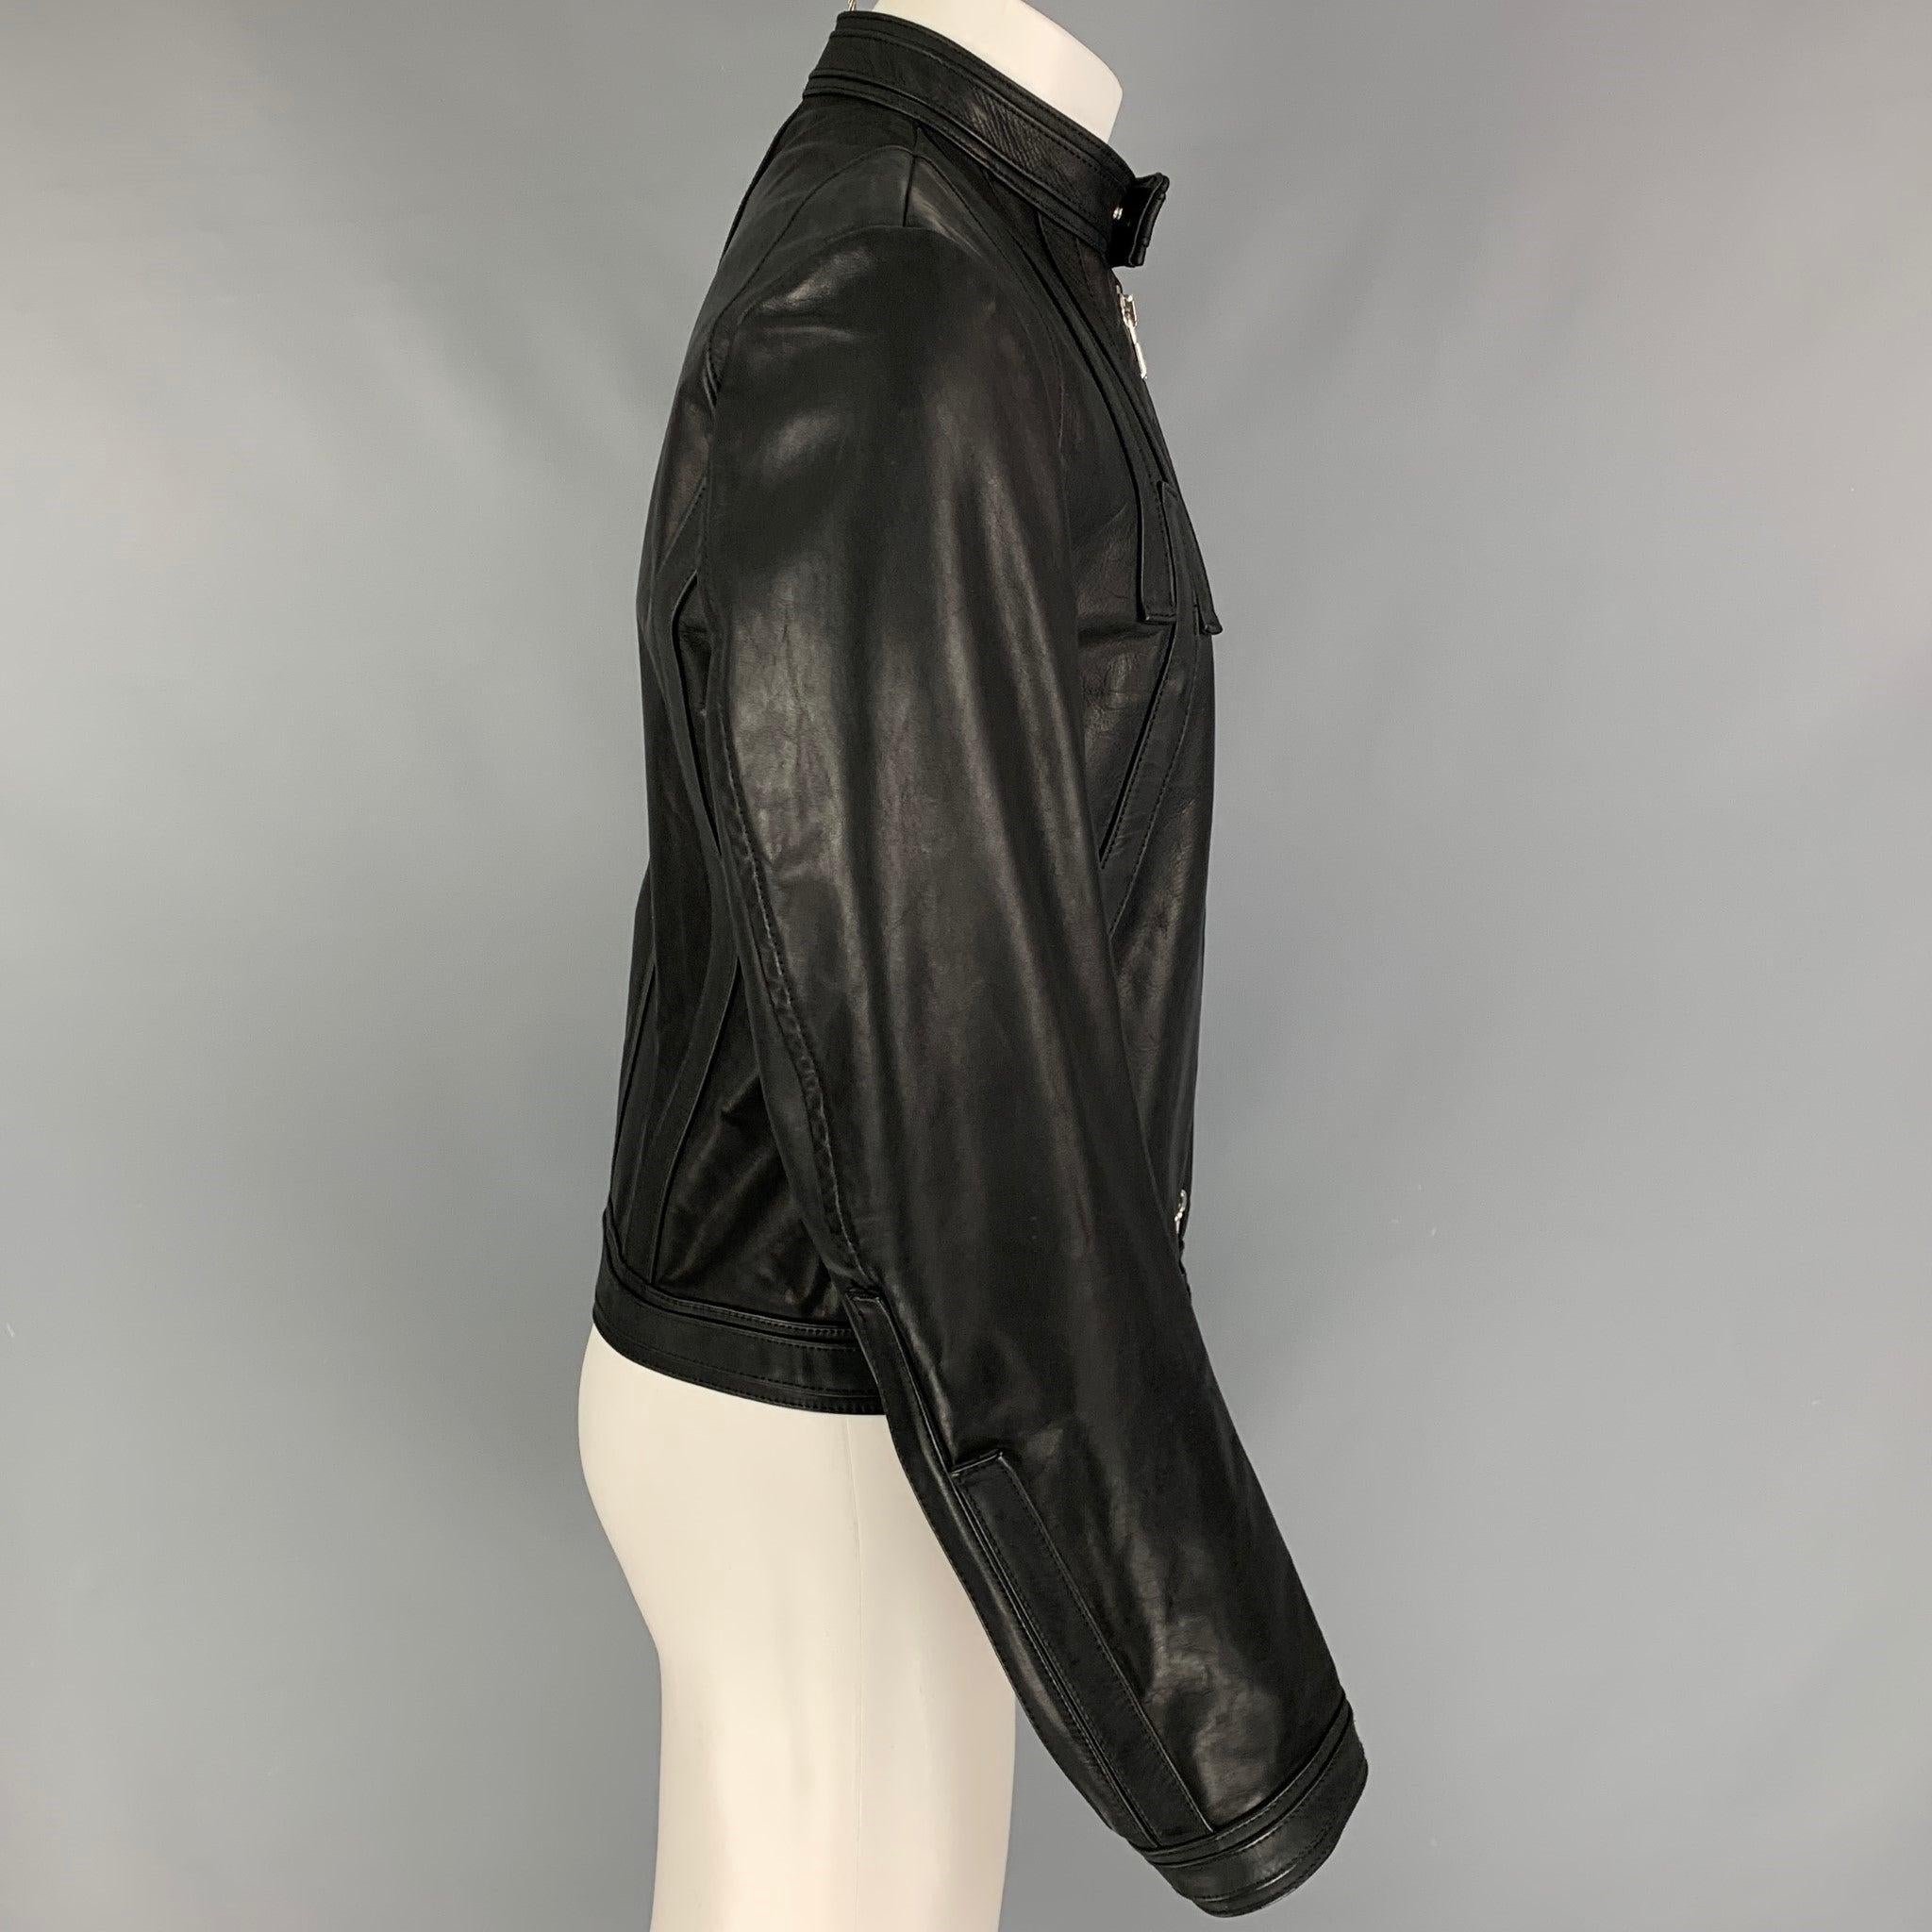 DSQUARED2 jacket comes in a black leather with a full liner featuring a motorcycle style, front stripe details, front zipper pockets, zipped sleeves, and a full zip up closure. Made in Italy.
Excellent
Pre-Owned Condition. 

Marked:   50